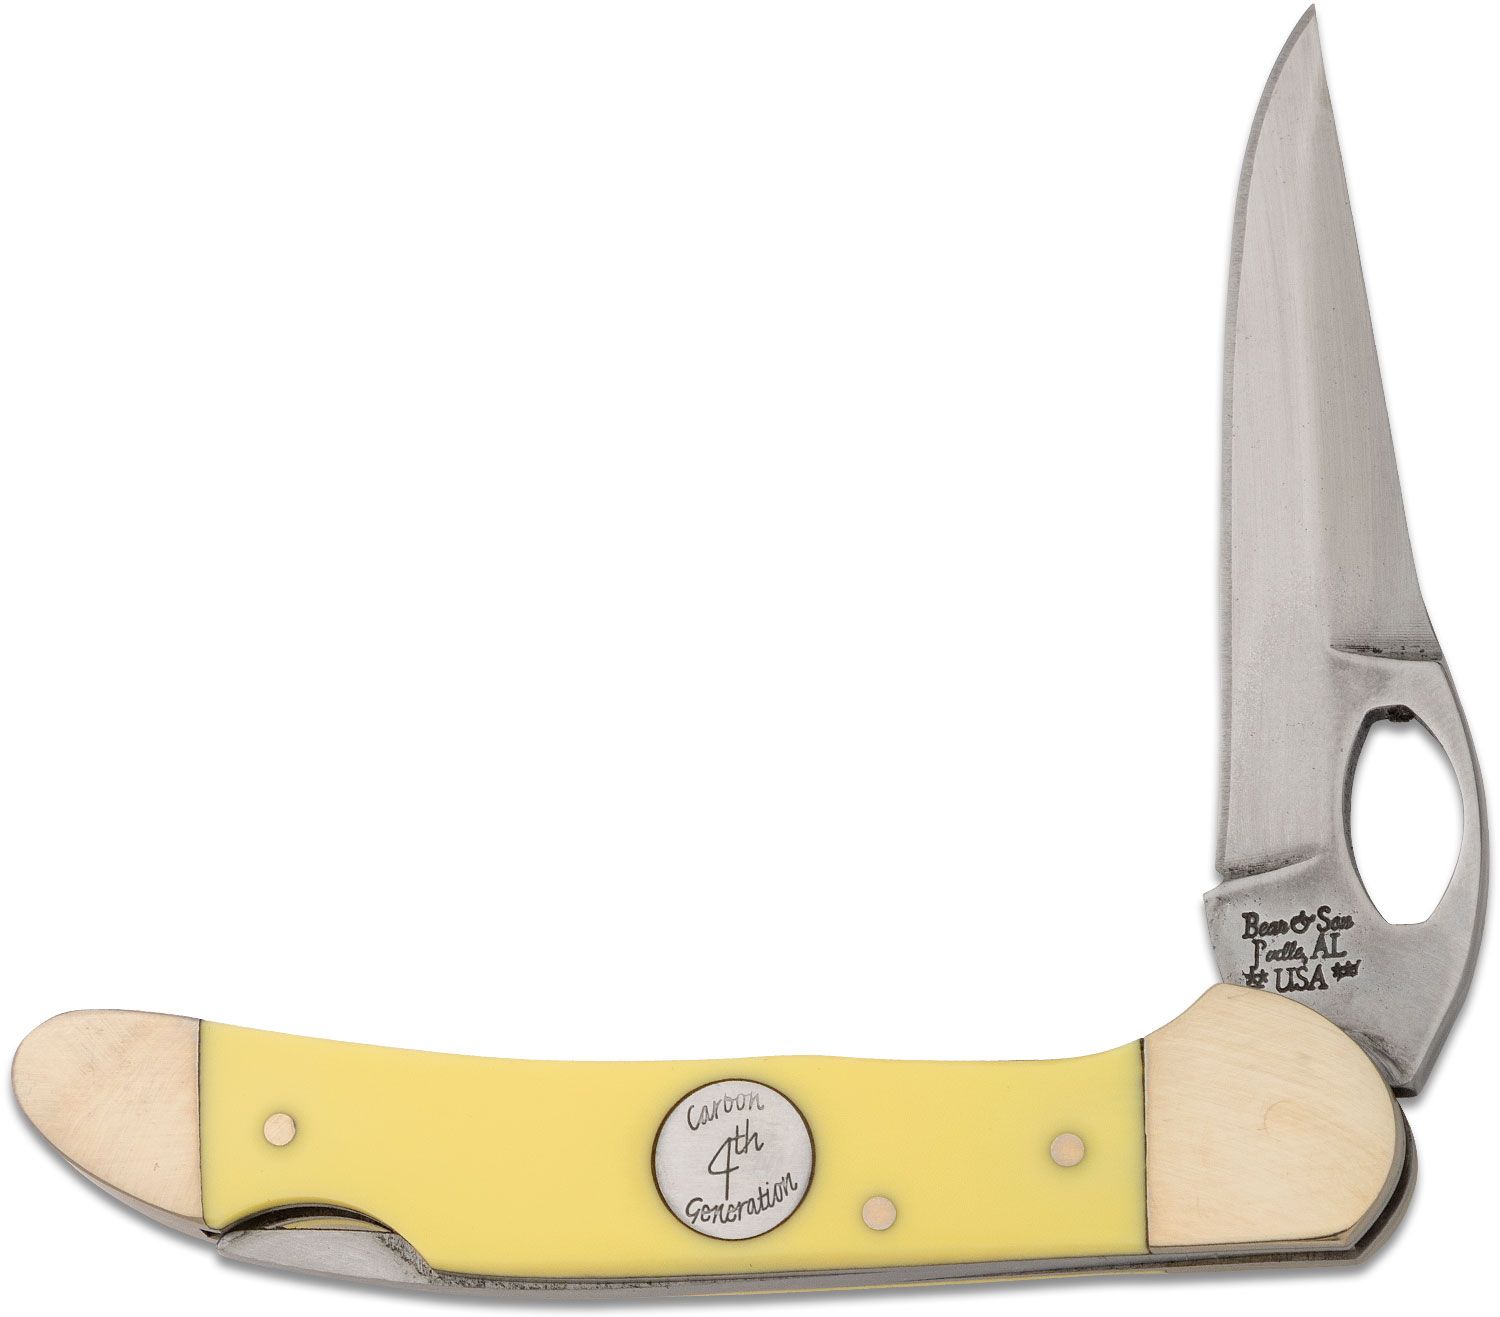 Bear Son Cowhand Folding Knife 2 875 1095 Carbon Steel Blade Yellow Delrin Handles Knifecenter C3149l